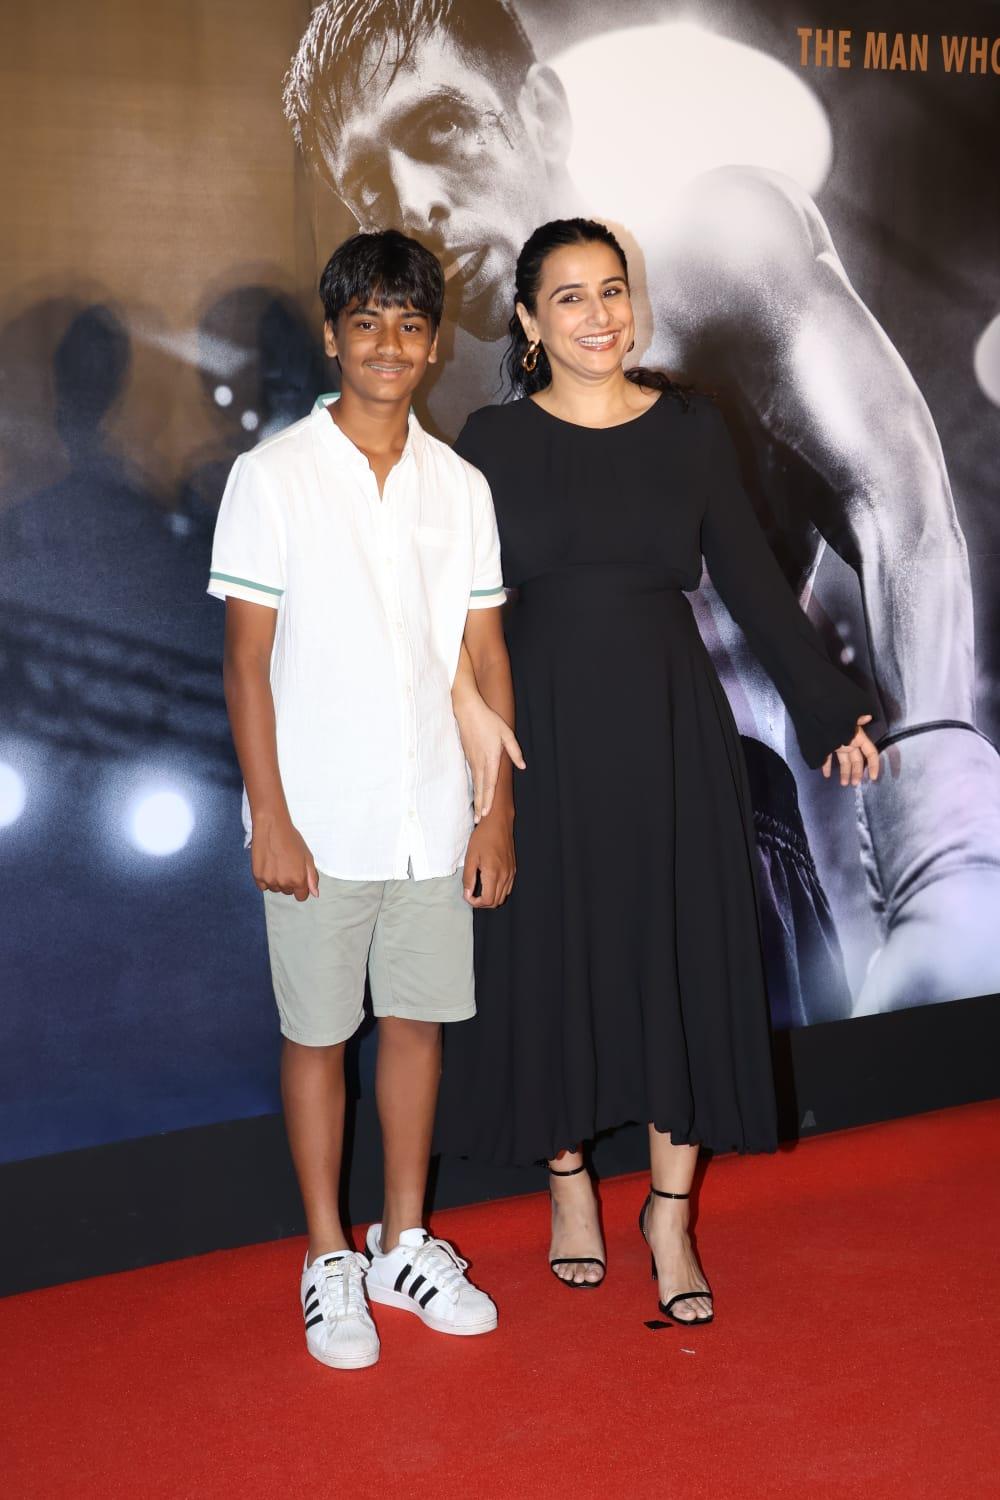 At the premiere, the actress also posed with her nephew and jokingly told the paparazzi, 